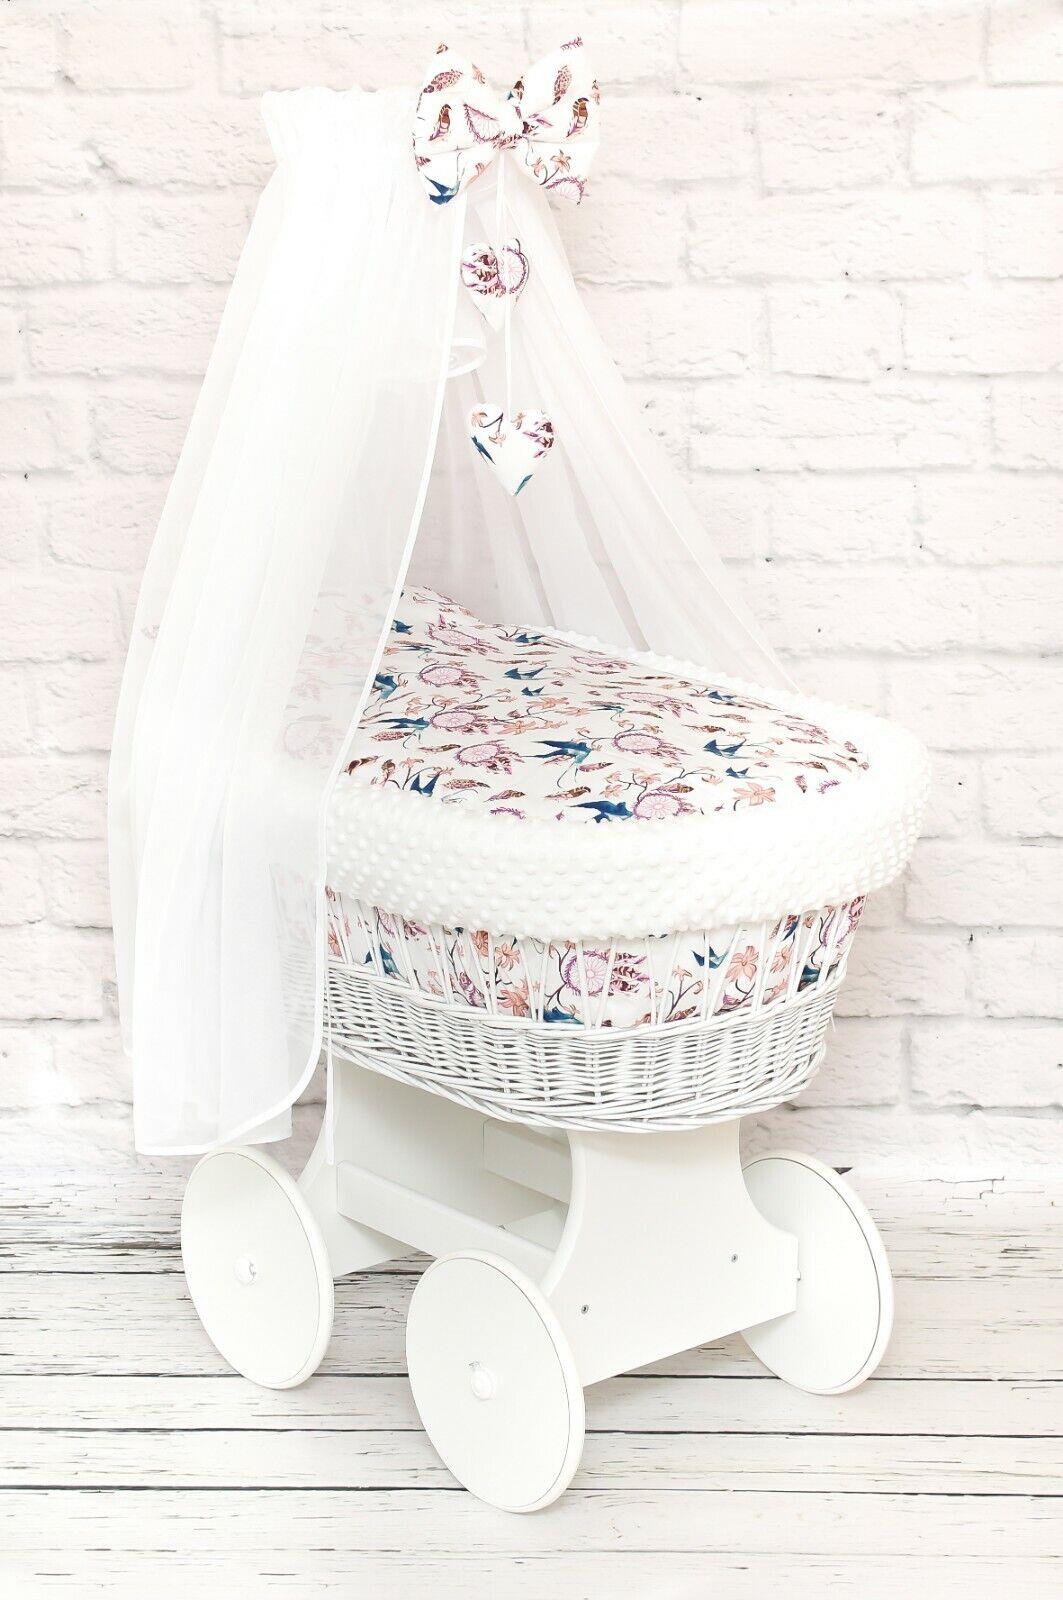 White Wicker Moses Basket with Wheels Baby+full Bedding Set Dream catcher birds - white dimple